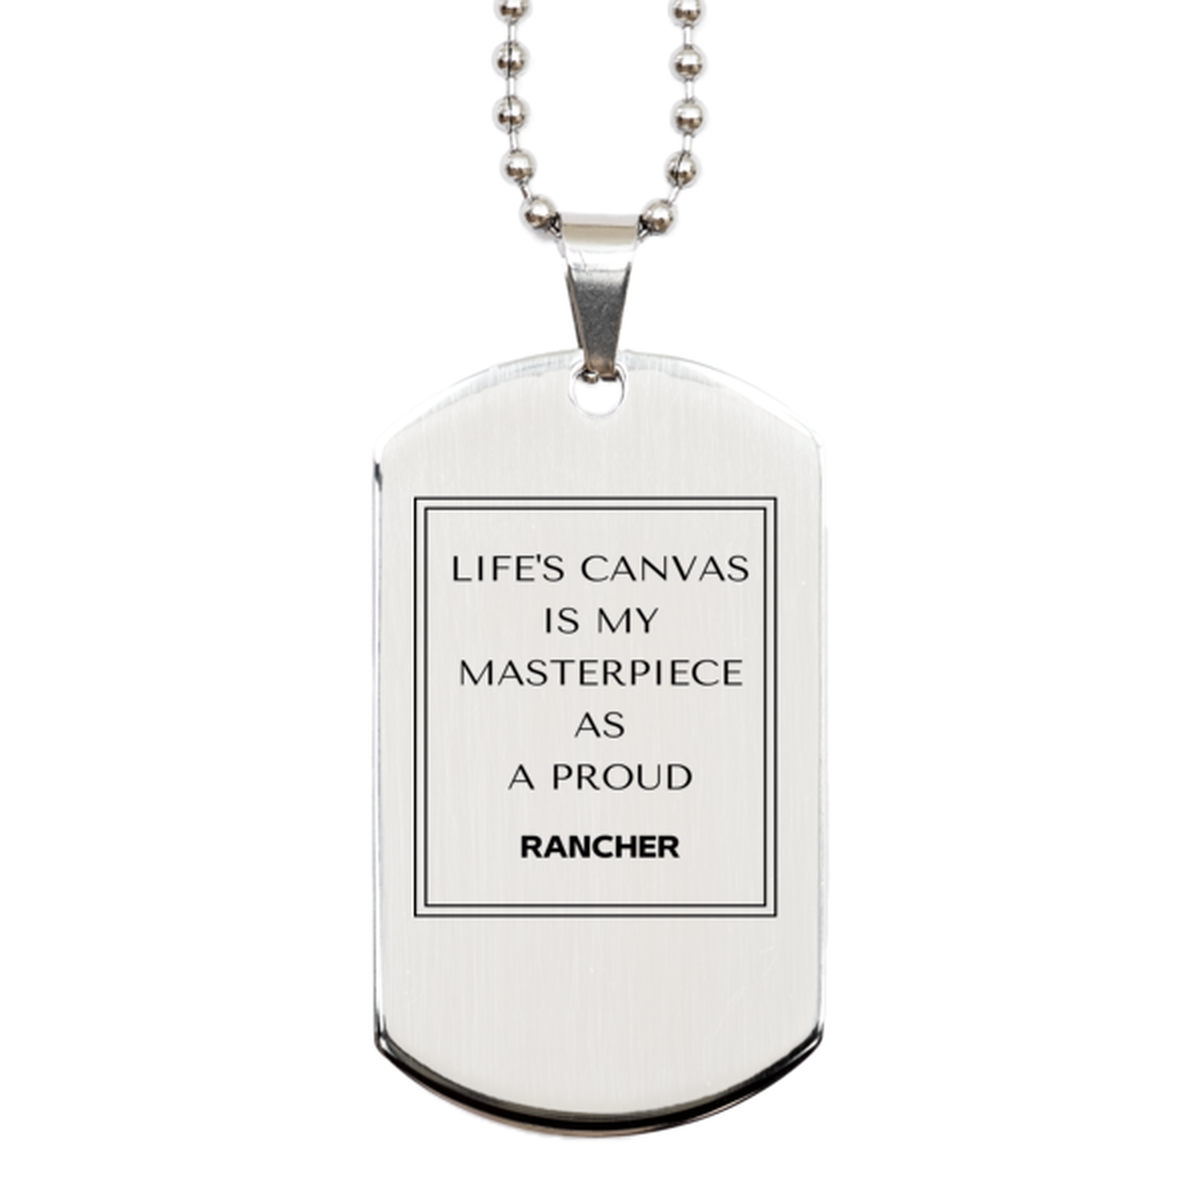 Proud Rancher Gifts, Life's canvas is my masterpiece, Epic Birthday Christmas Unique Silver Dog Tag For Rancher, Coworkers, Men, Women, Friends